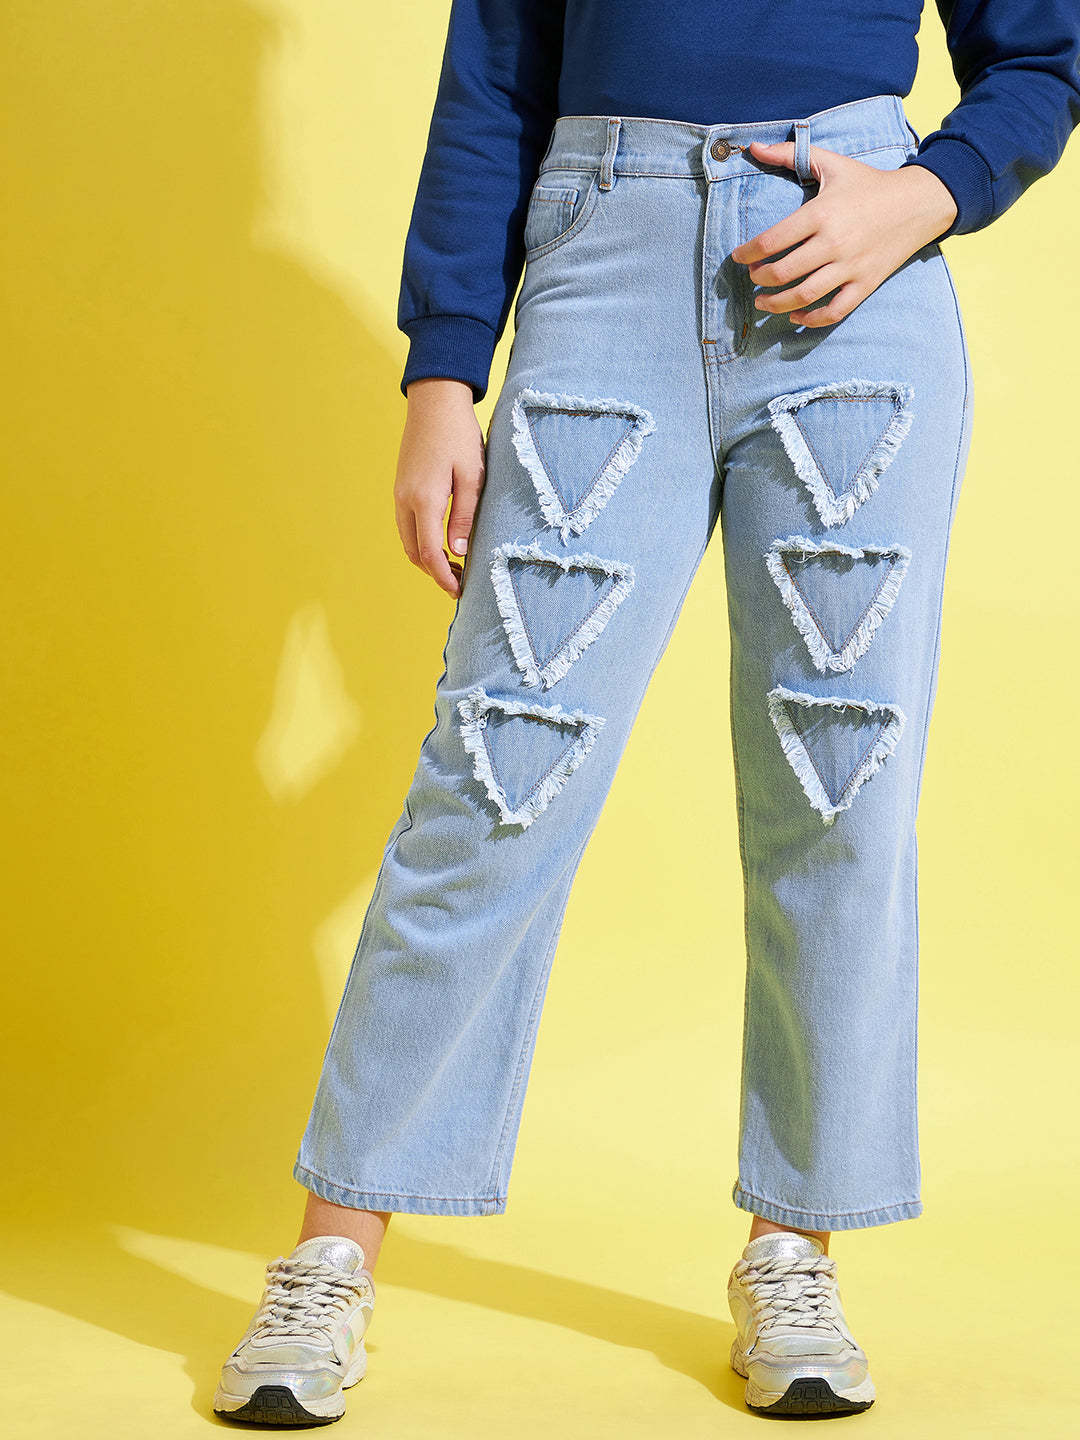 Buy Girls Ice Blue Triangle Patch Jeans Online at Sassafras